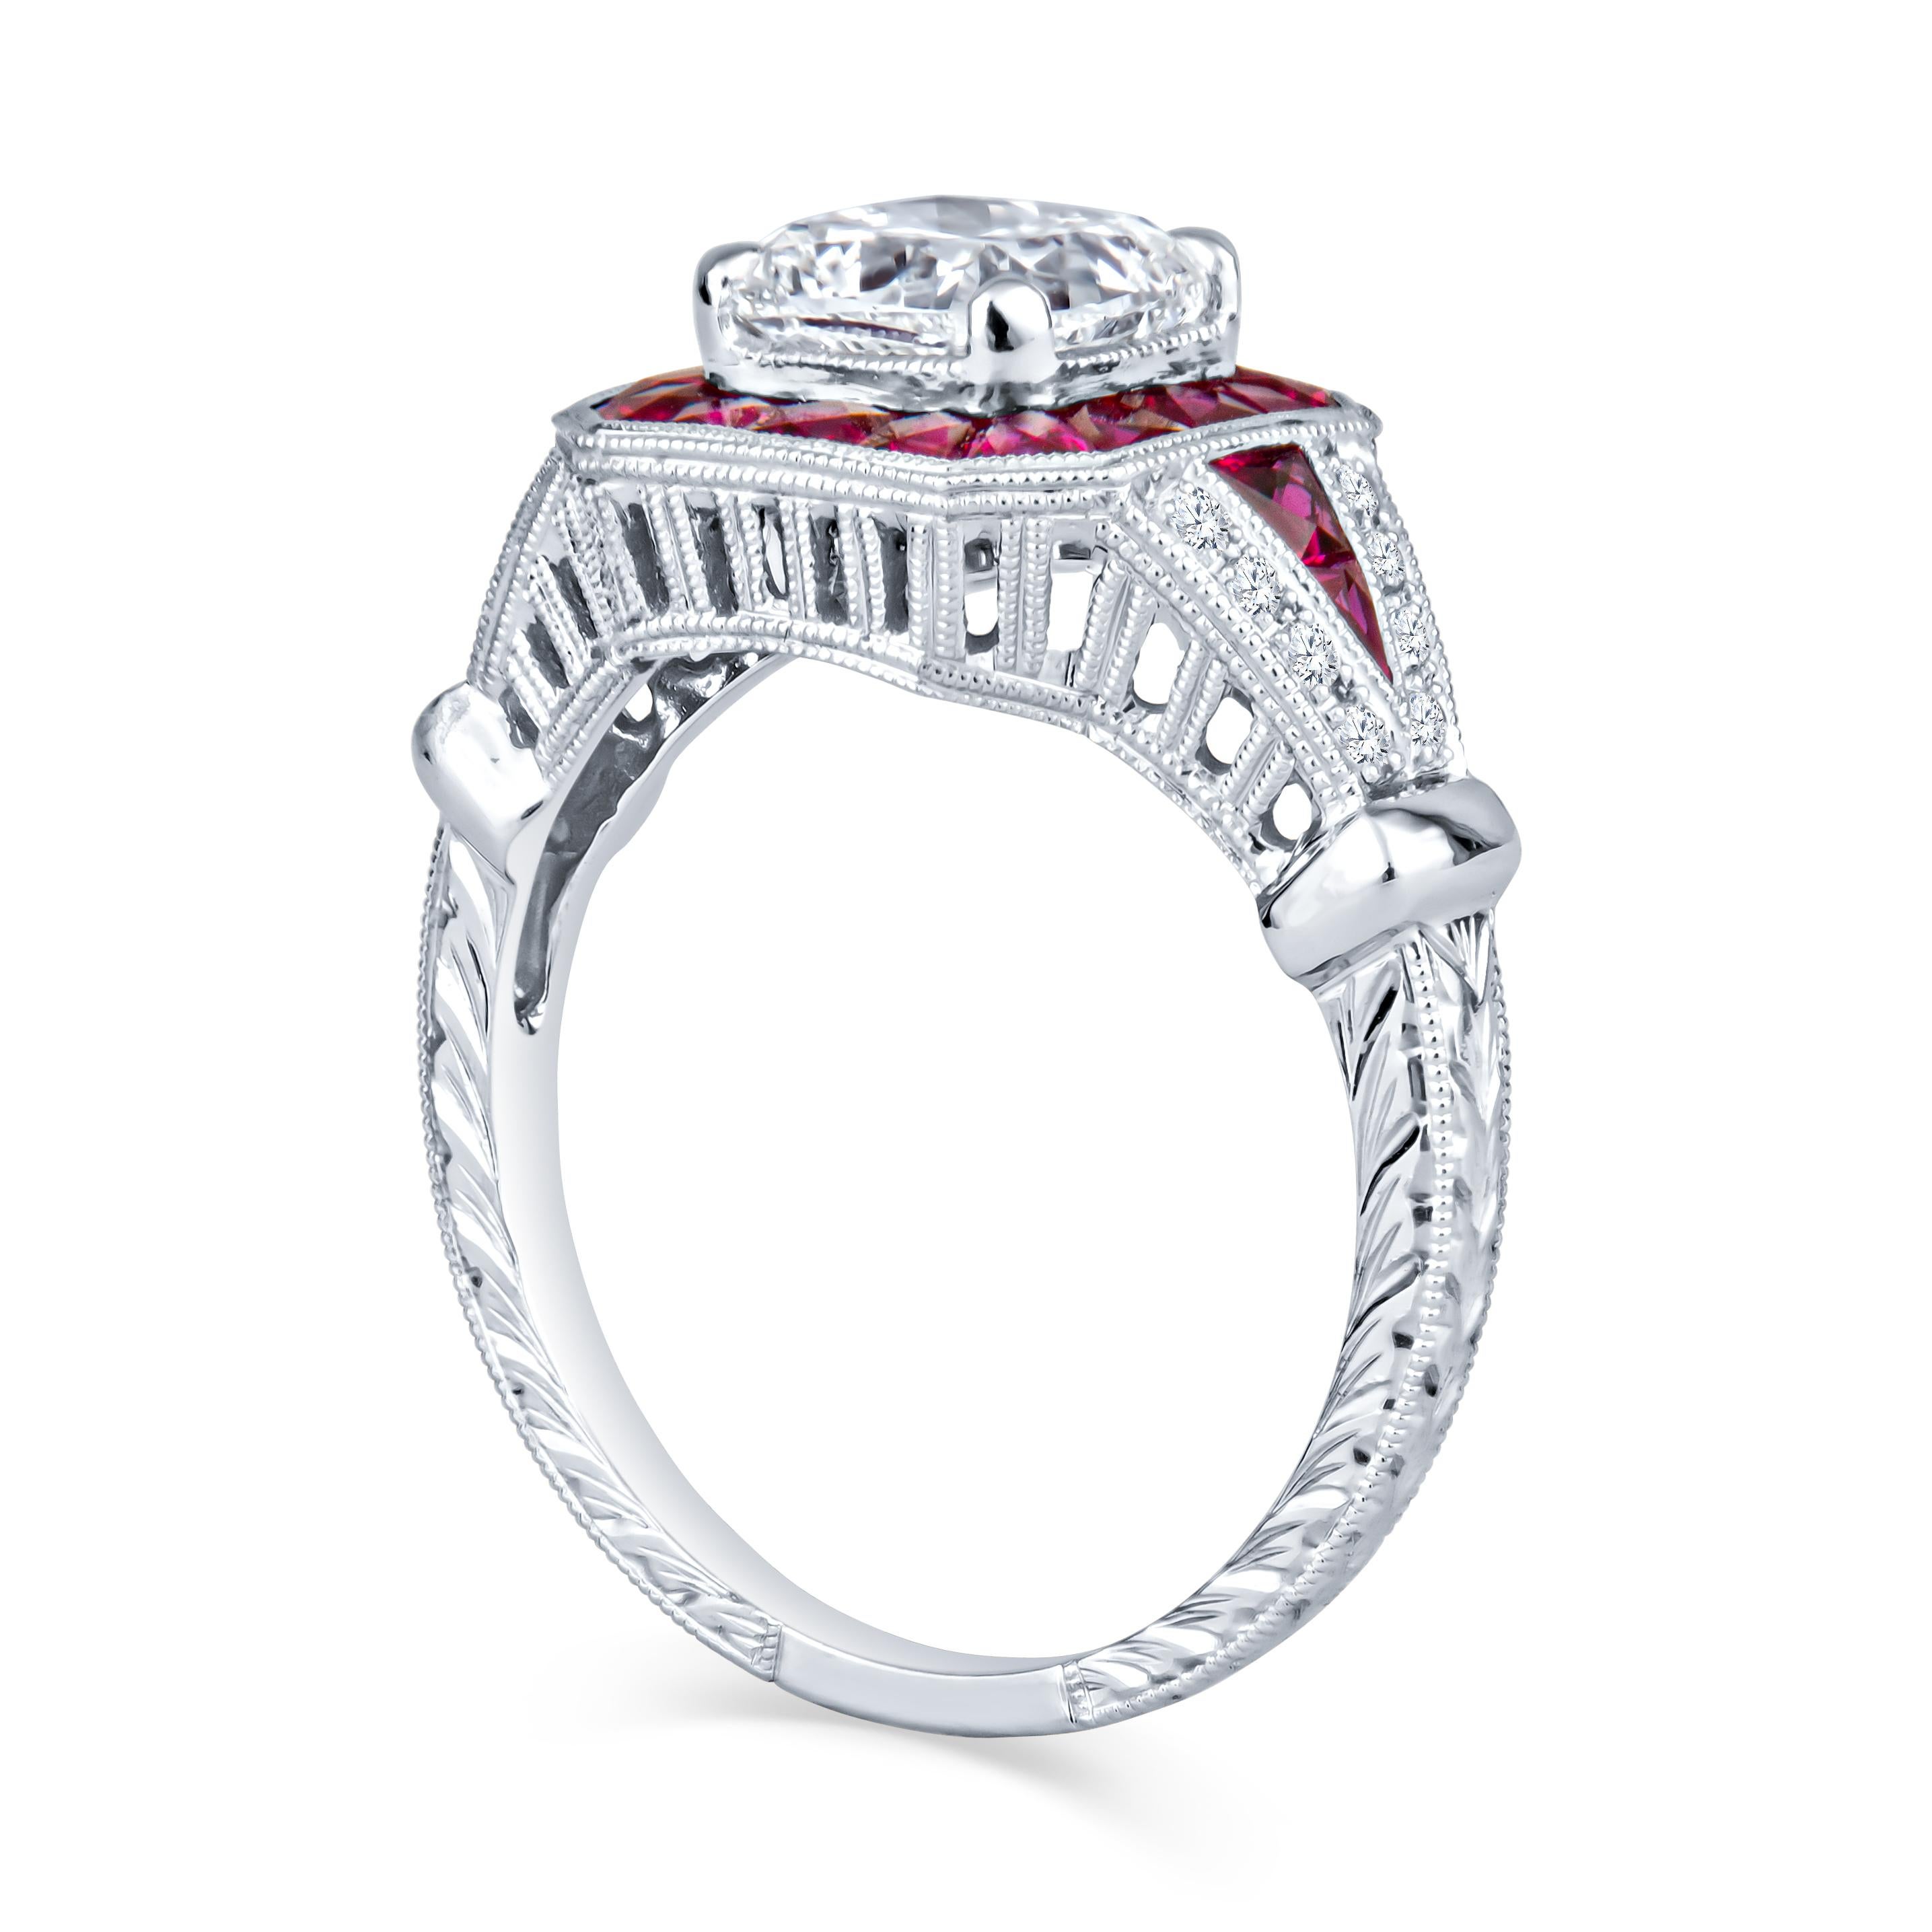 Cushion Cut 1.60ct Cushion Diamond, GIA Certified, with 1.23ct Ruby Accent Vintage Inspired For Sale